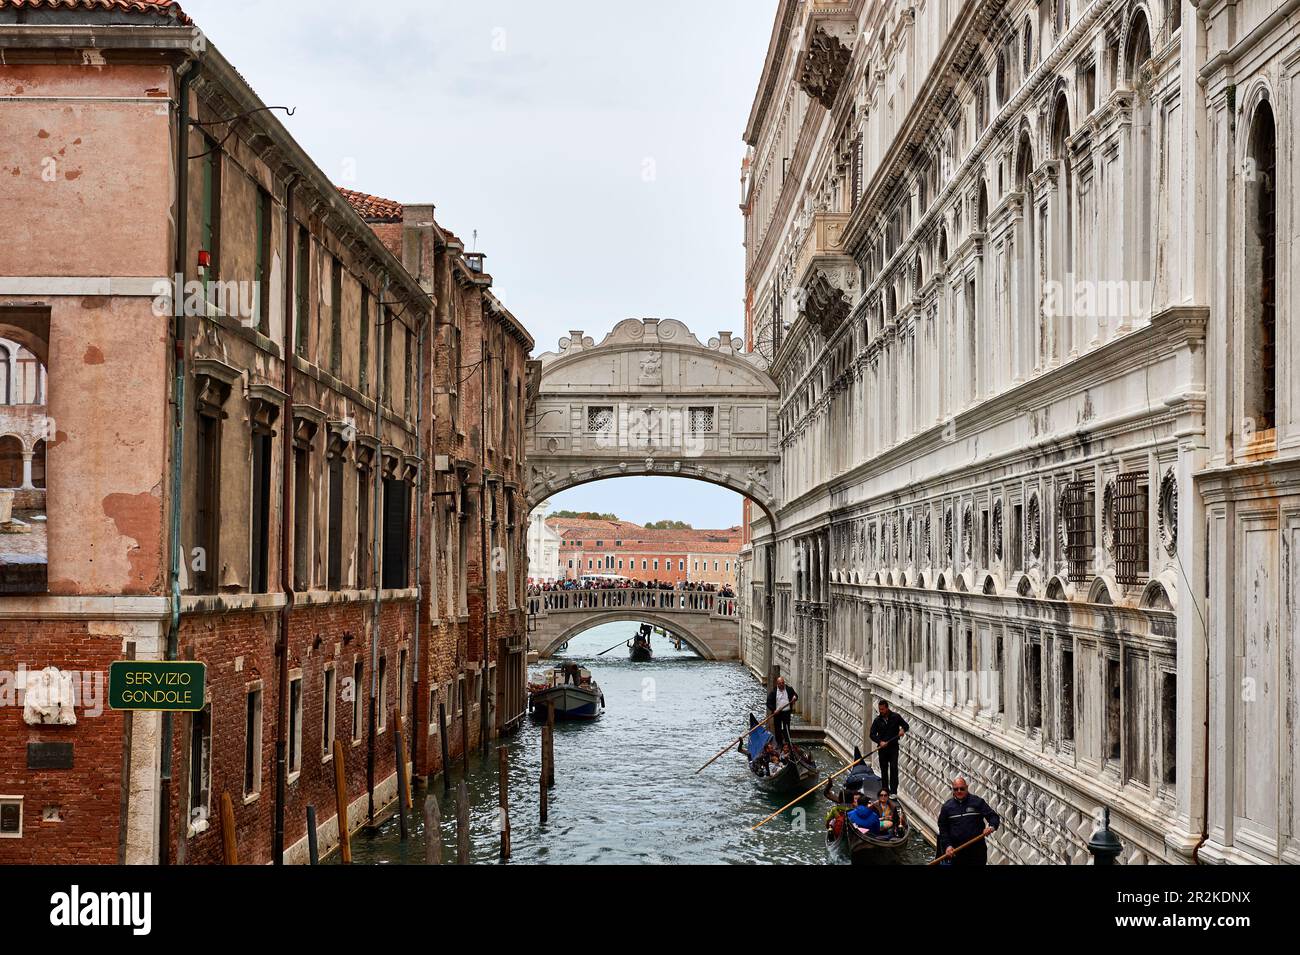 View of the famous Ponte della Paglia stone bridge with origins from 1360,  renewed in 1847 and offering a view of the Bridge of Sighs, Venice, Italy  Stock Photo - Alamy